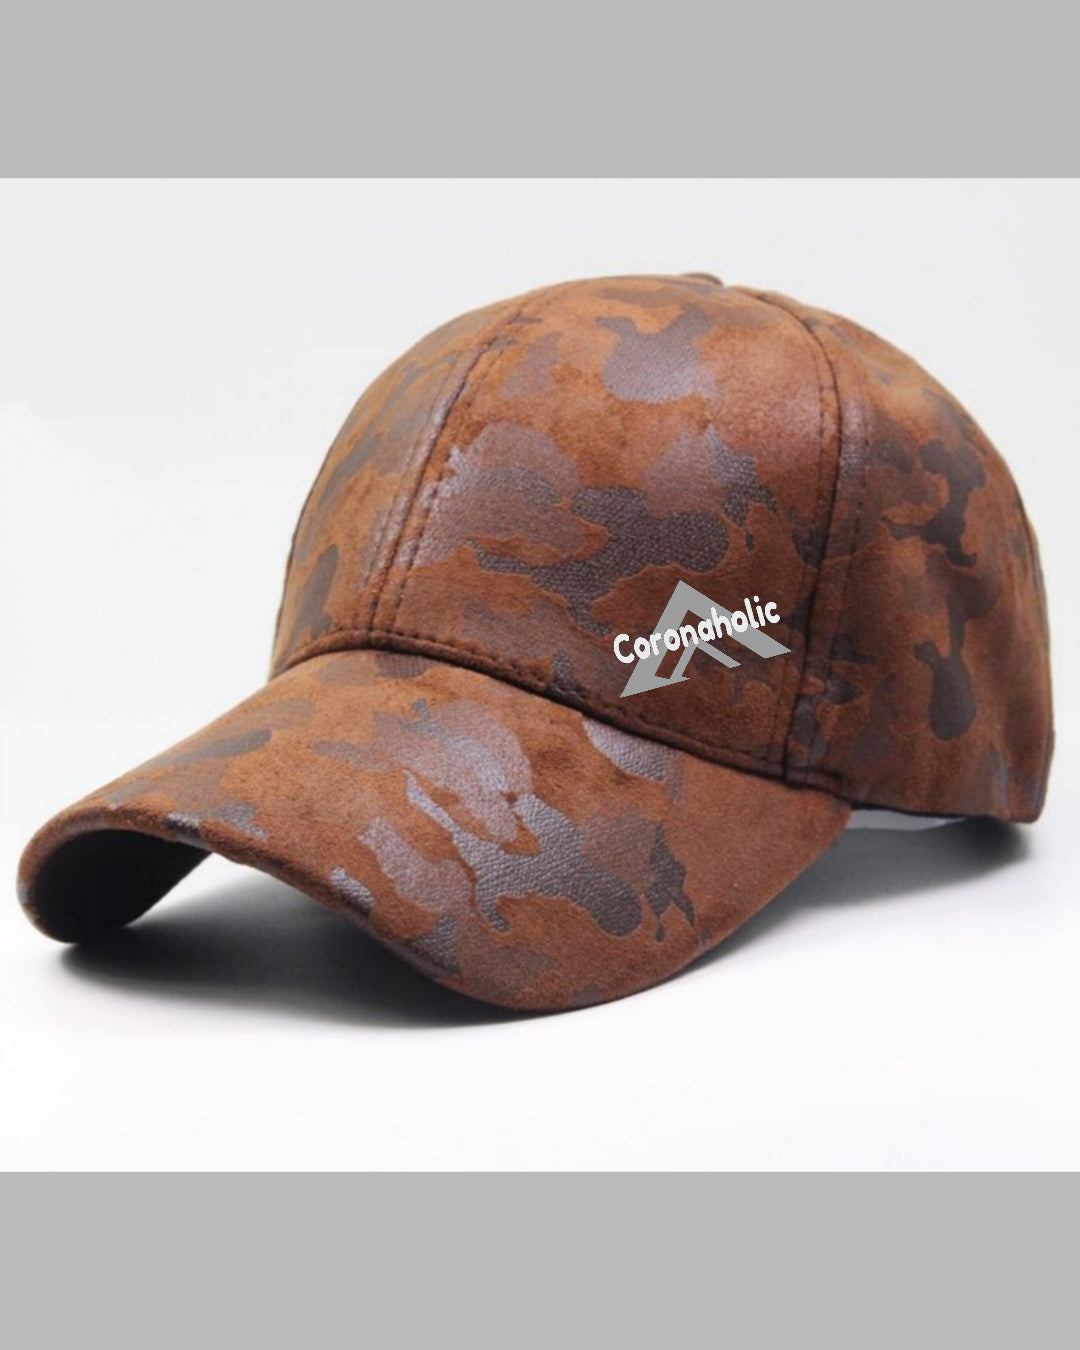 "Camouflage-Line Faux-Suede Leather Caps" for Ladies&Men made by Coronaholic Design&Label.